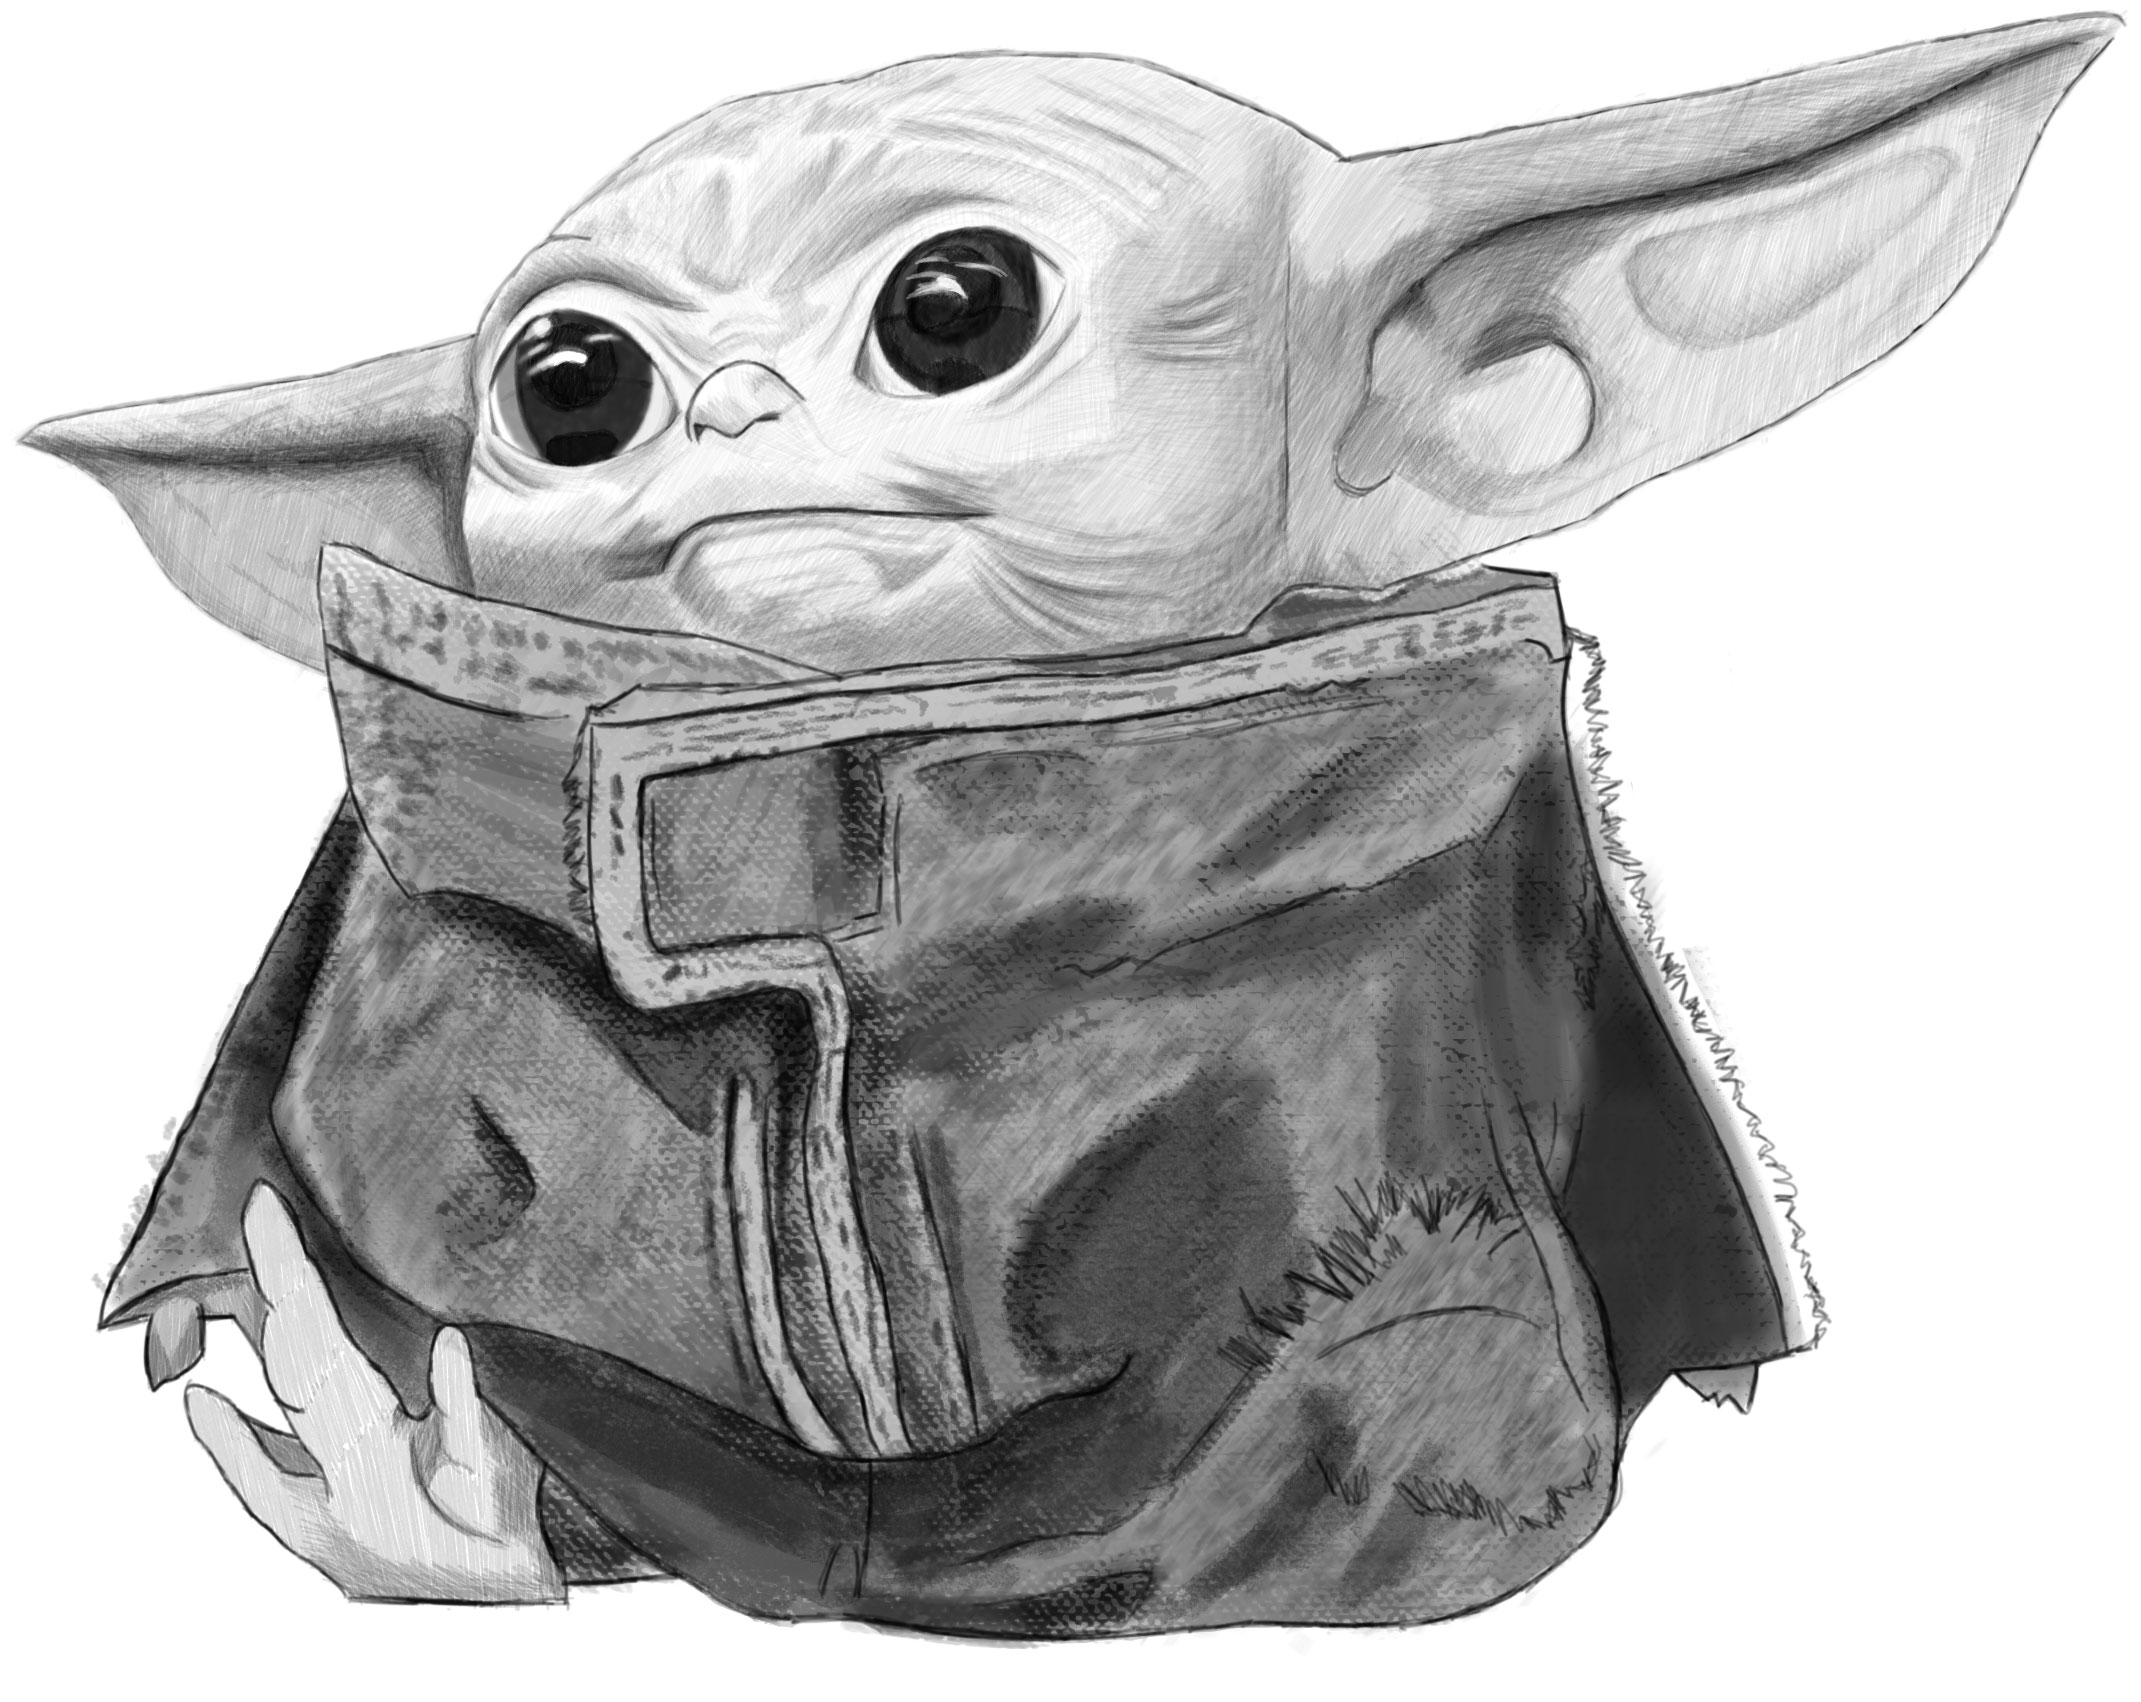 How to Draw Baby Yoda from The Mandalorian (Realistic) Easy Step by